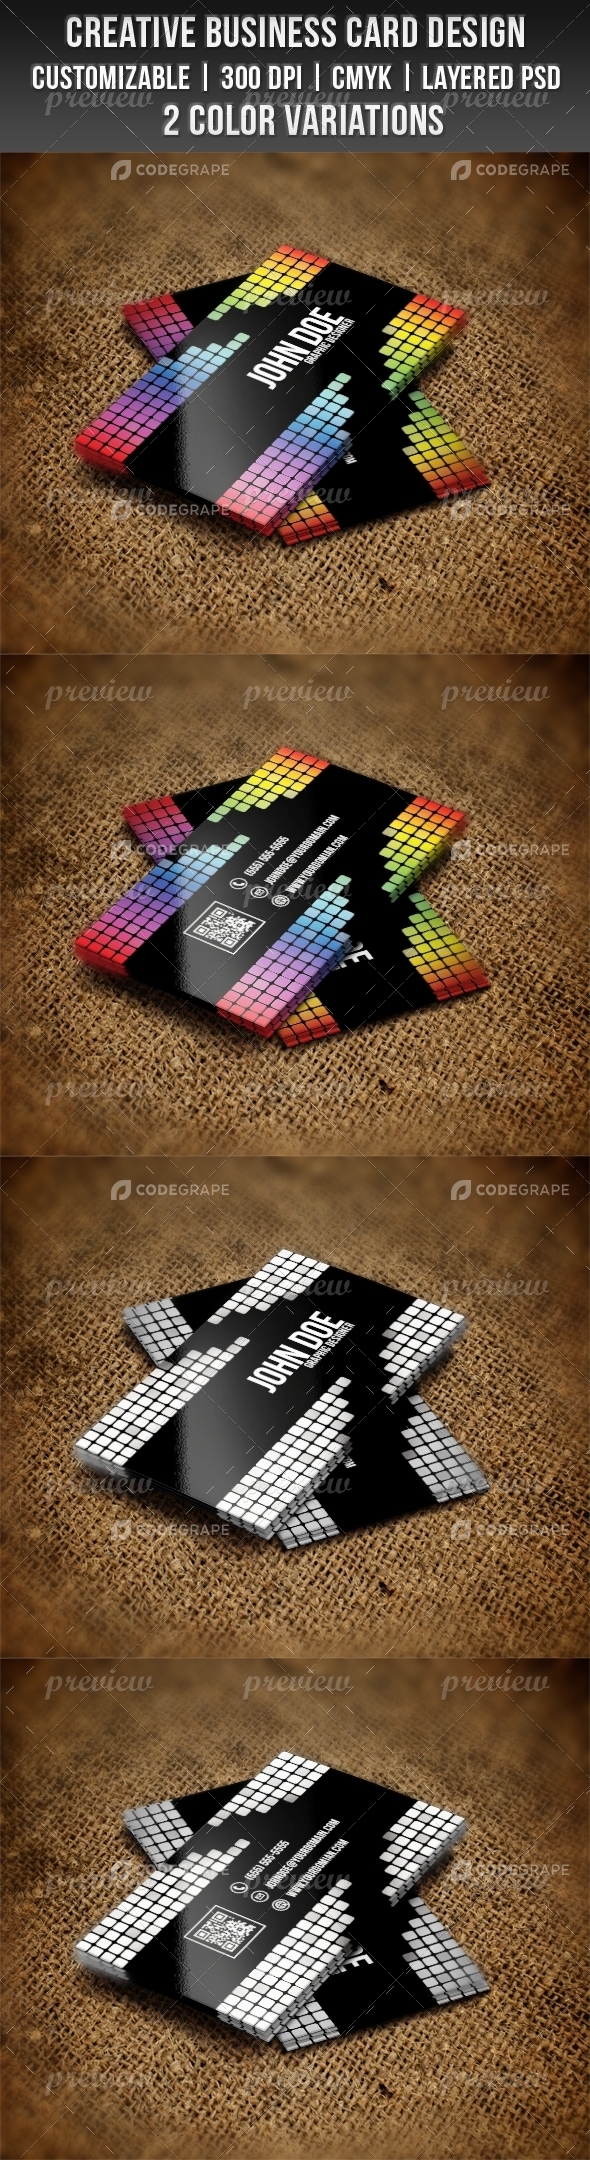 Creative Squares Business Card